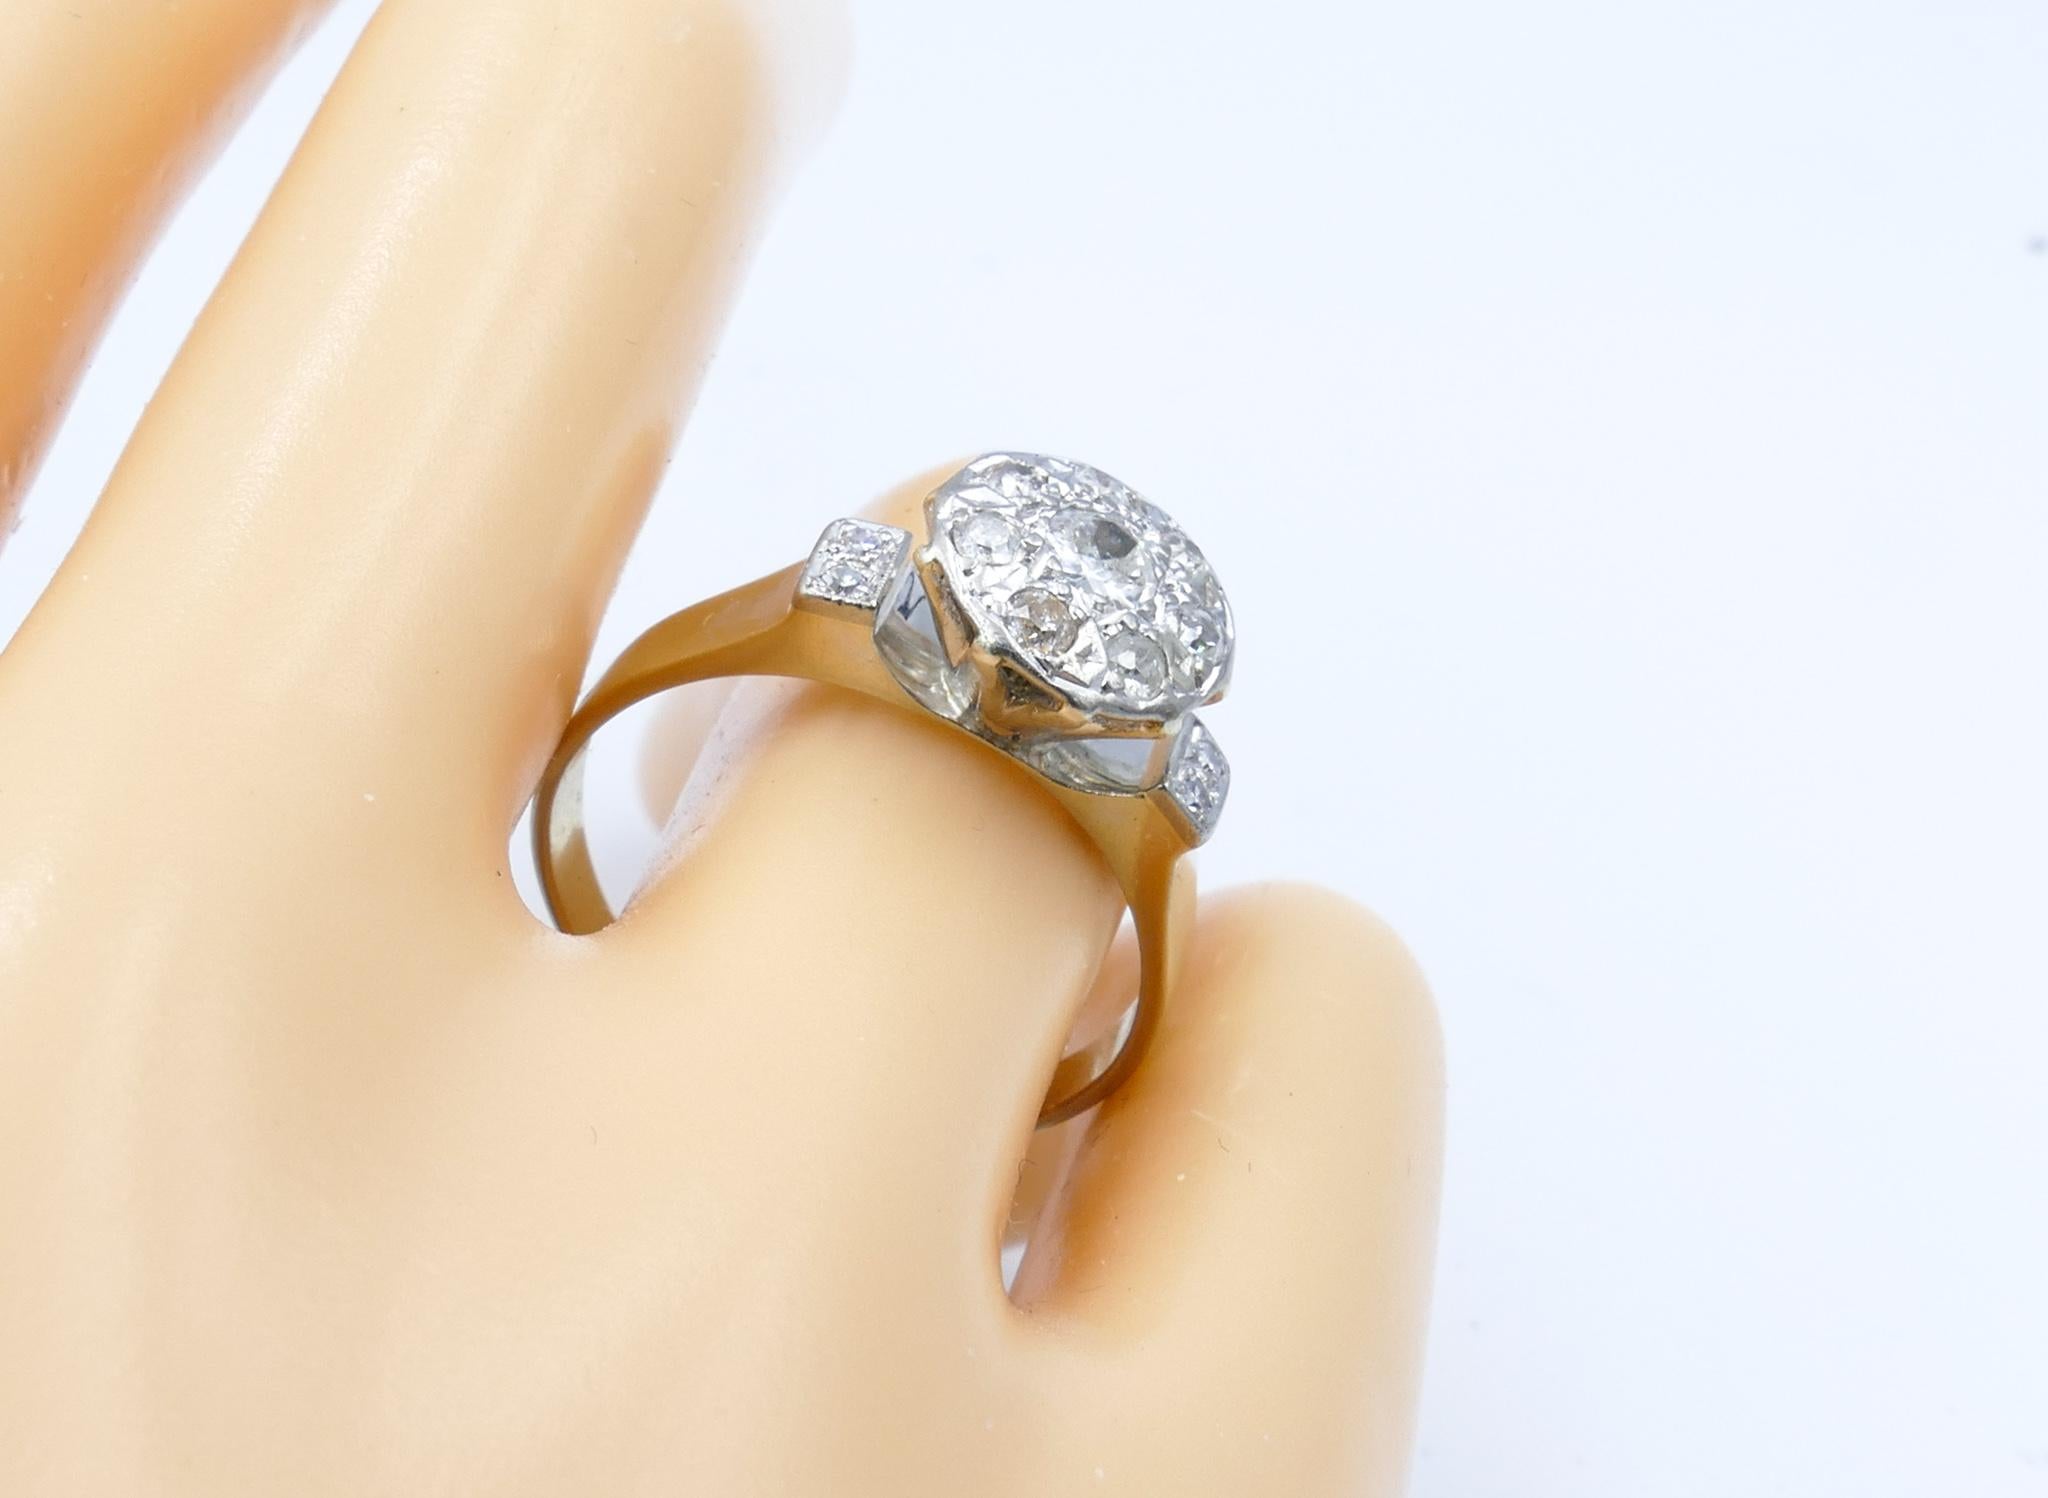 Antique 18ct White Gold Diamond Posy Ring In Excellent Condition For Sale In Splitter's Creek, NSW